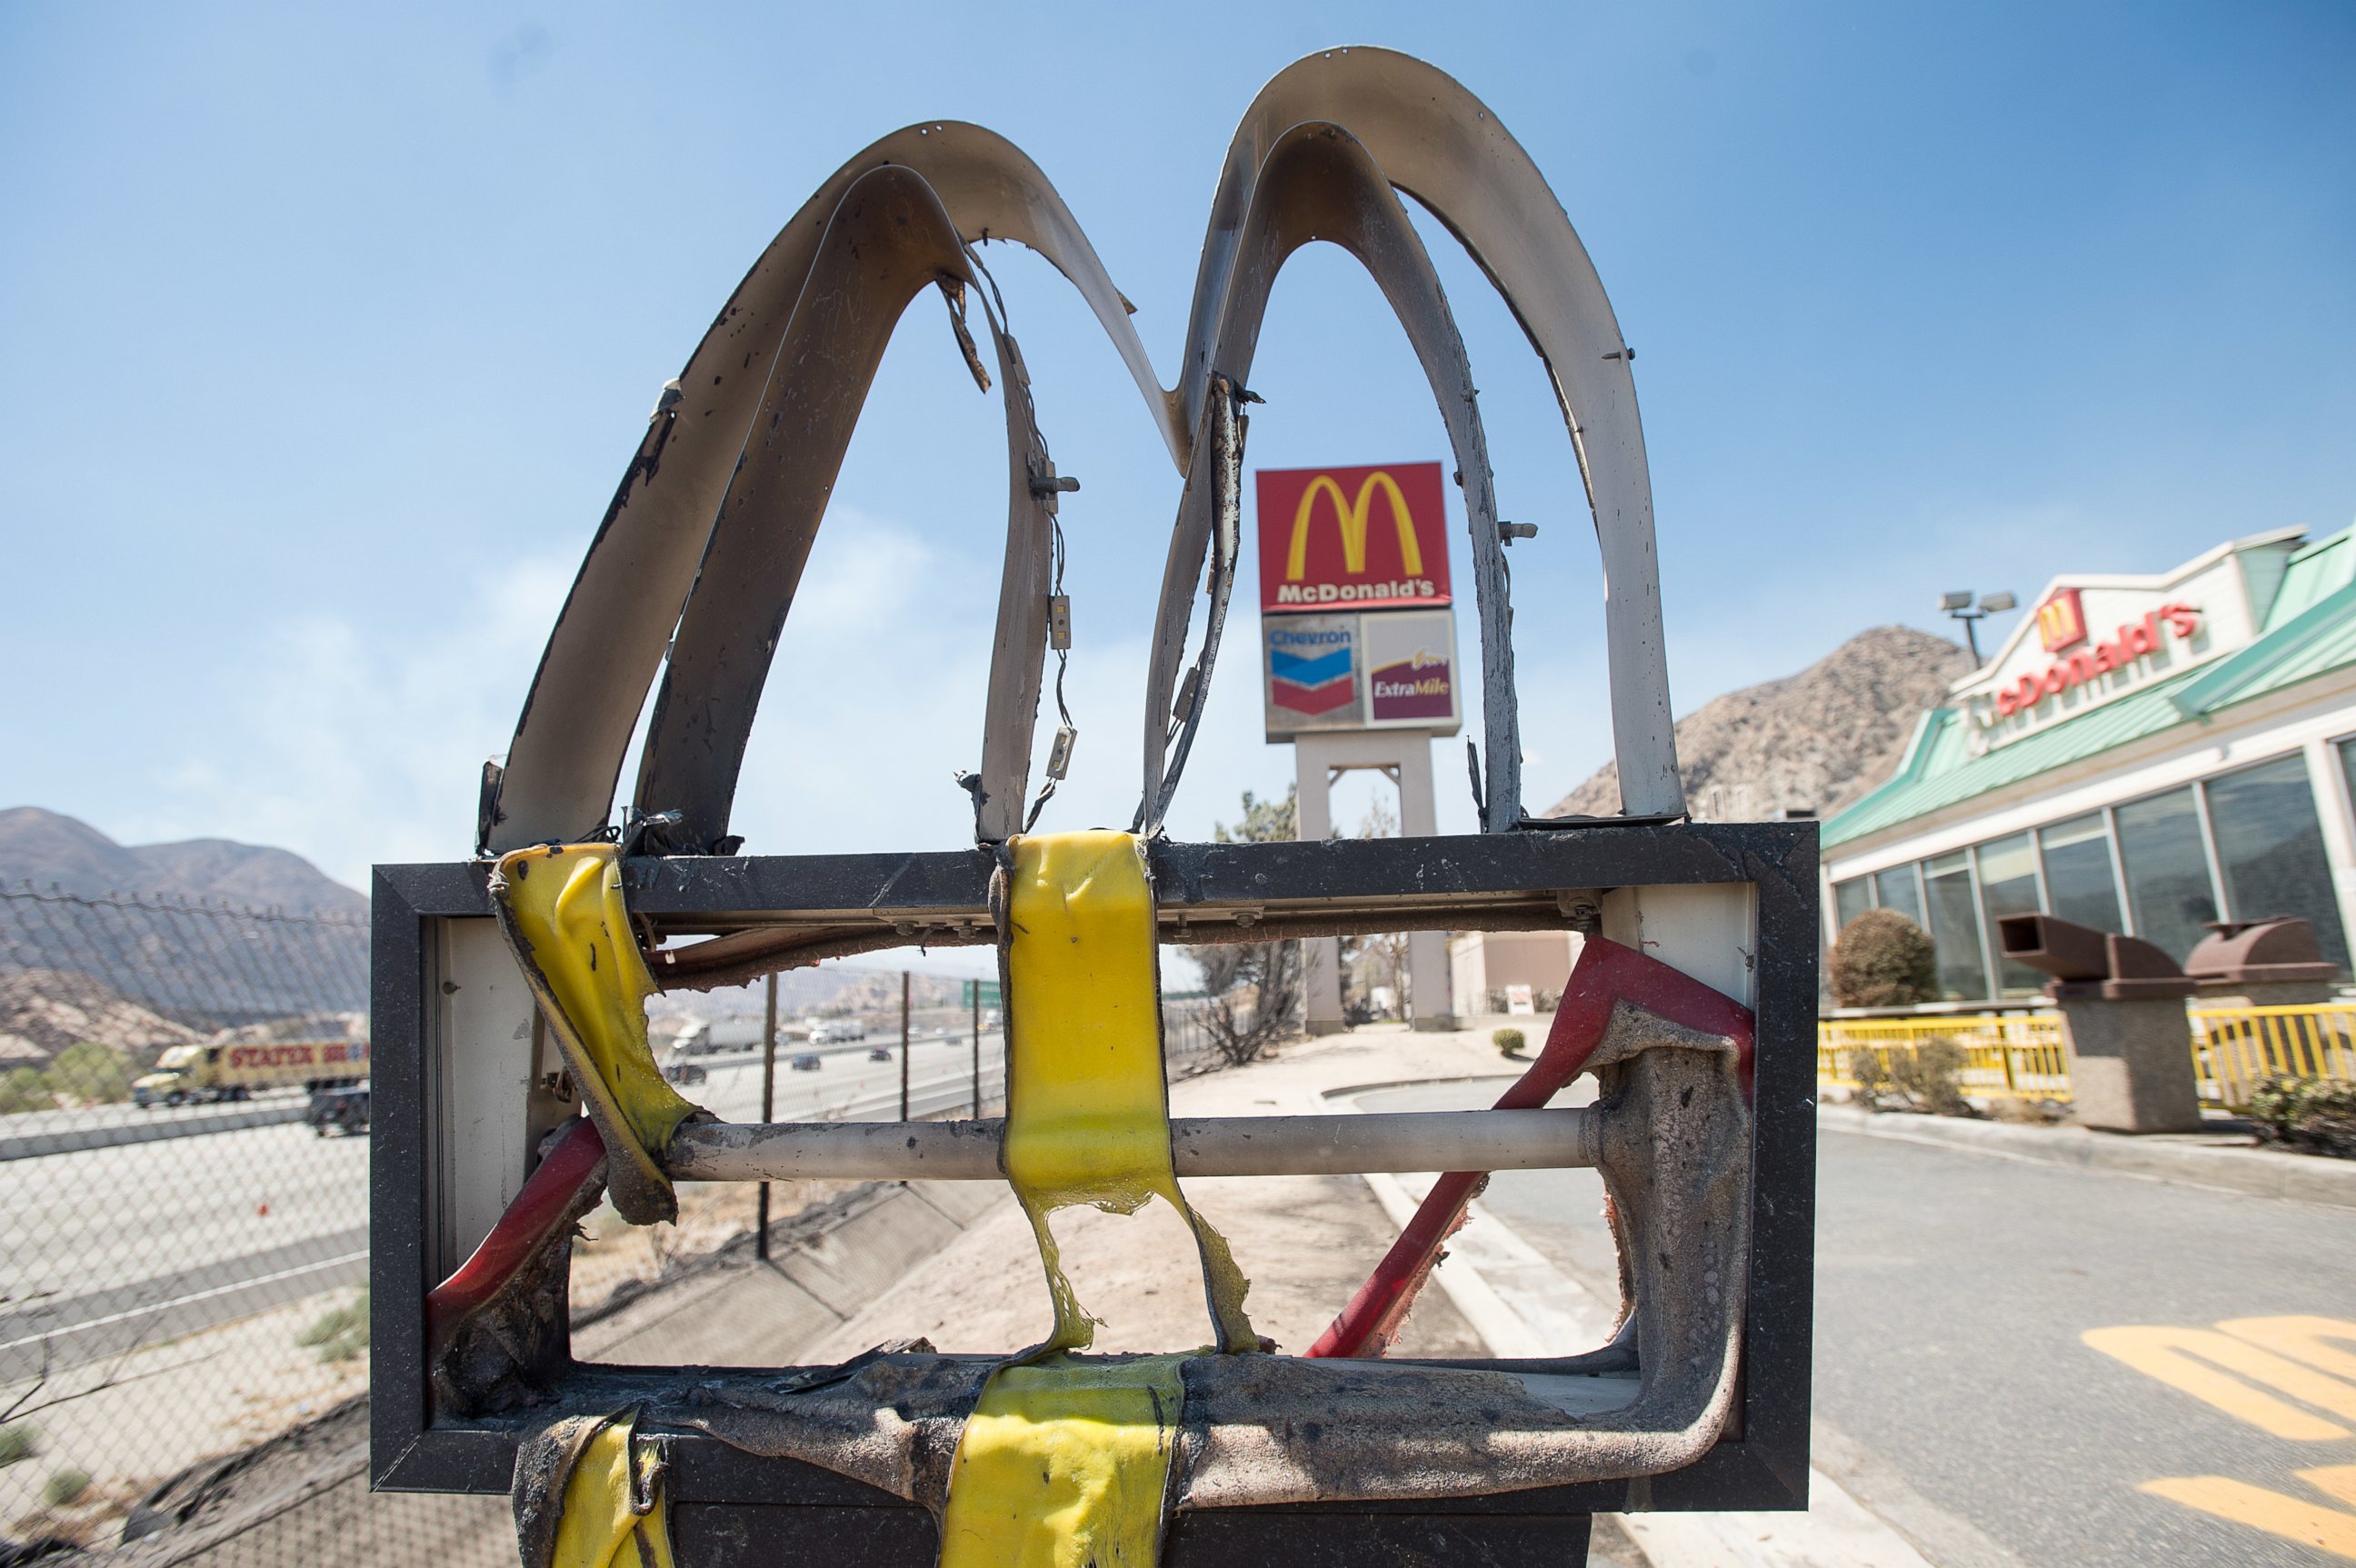 PHOTO: Following a wildfire, a melted McDonald's sign stands outside a restaurant in Cajon Junction, Calif., on Thursday, Aug. 18, 2016